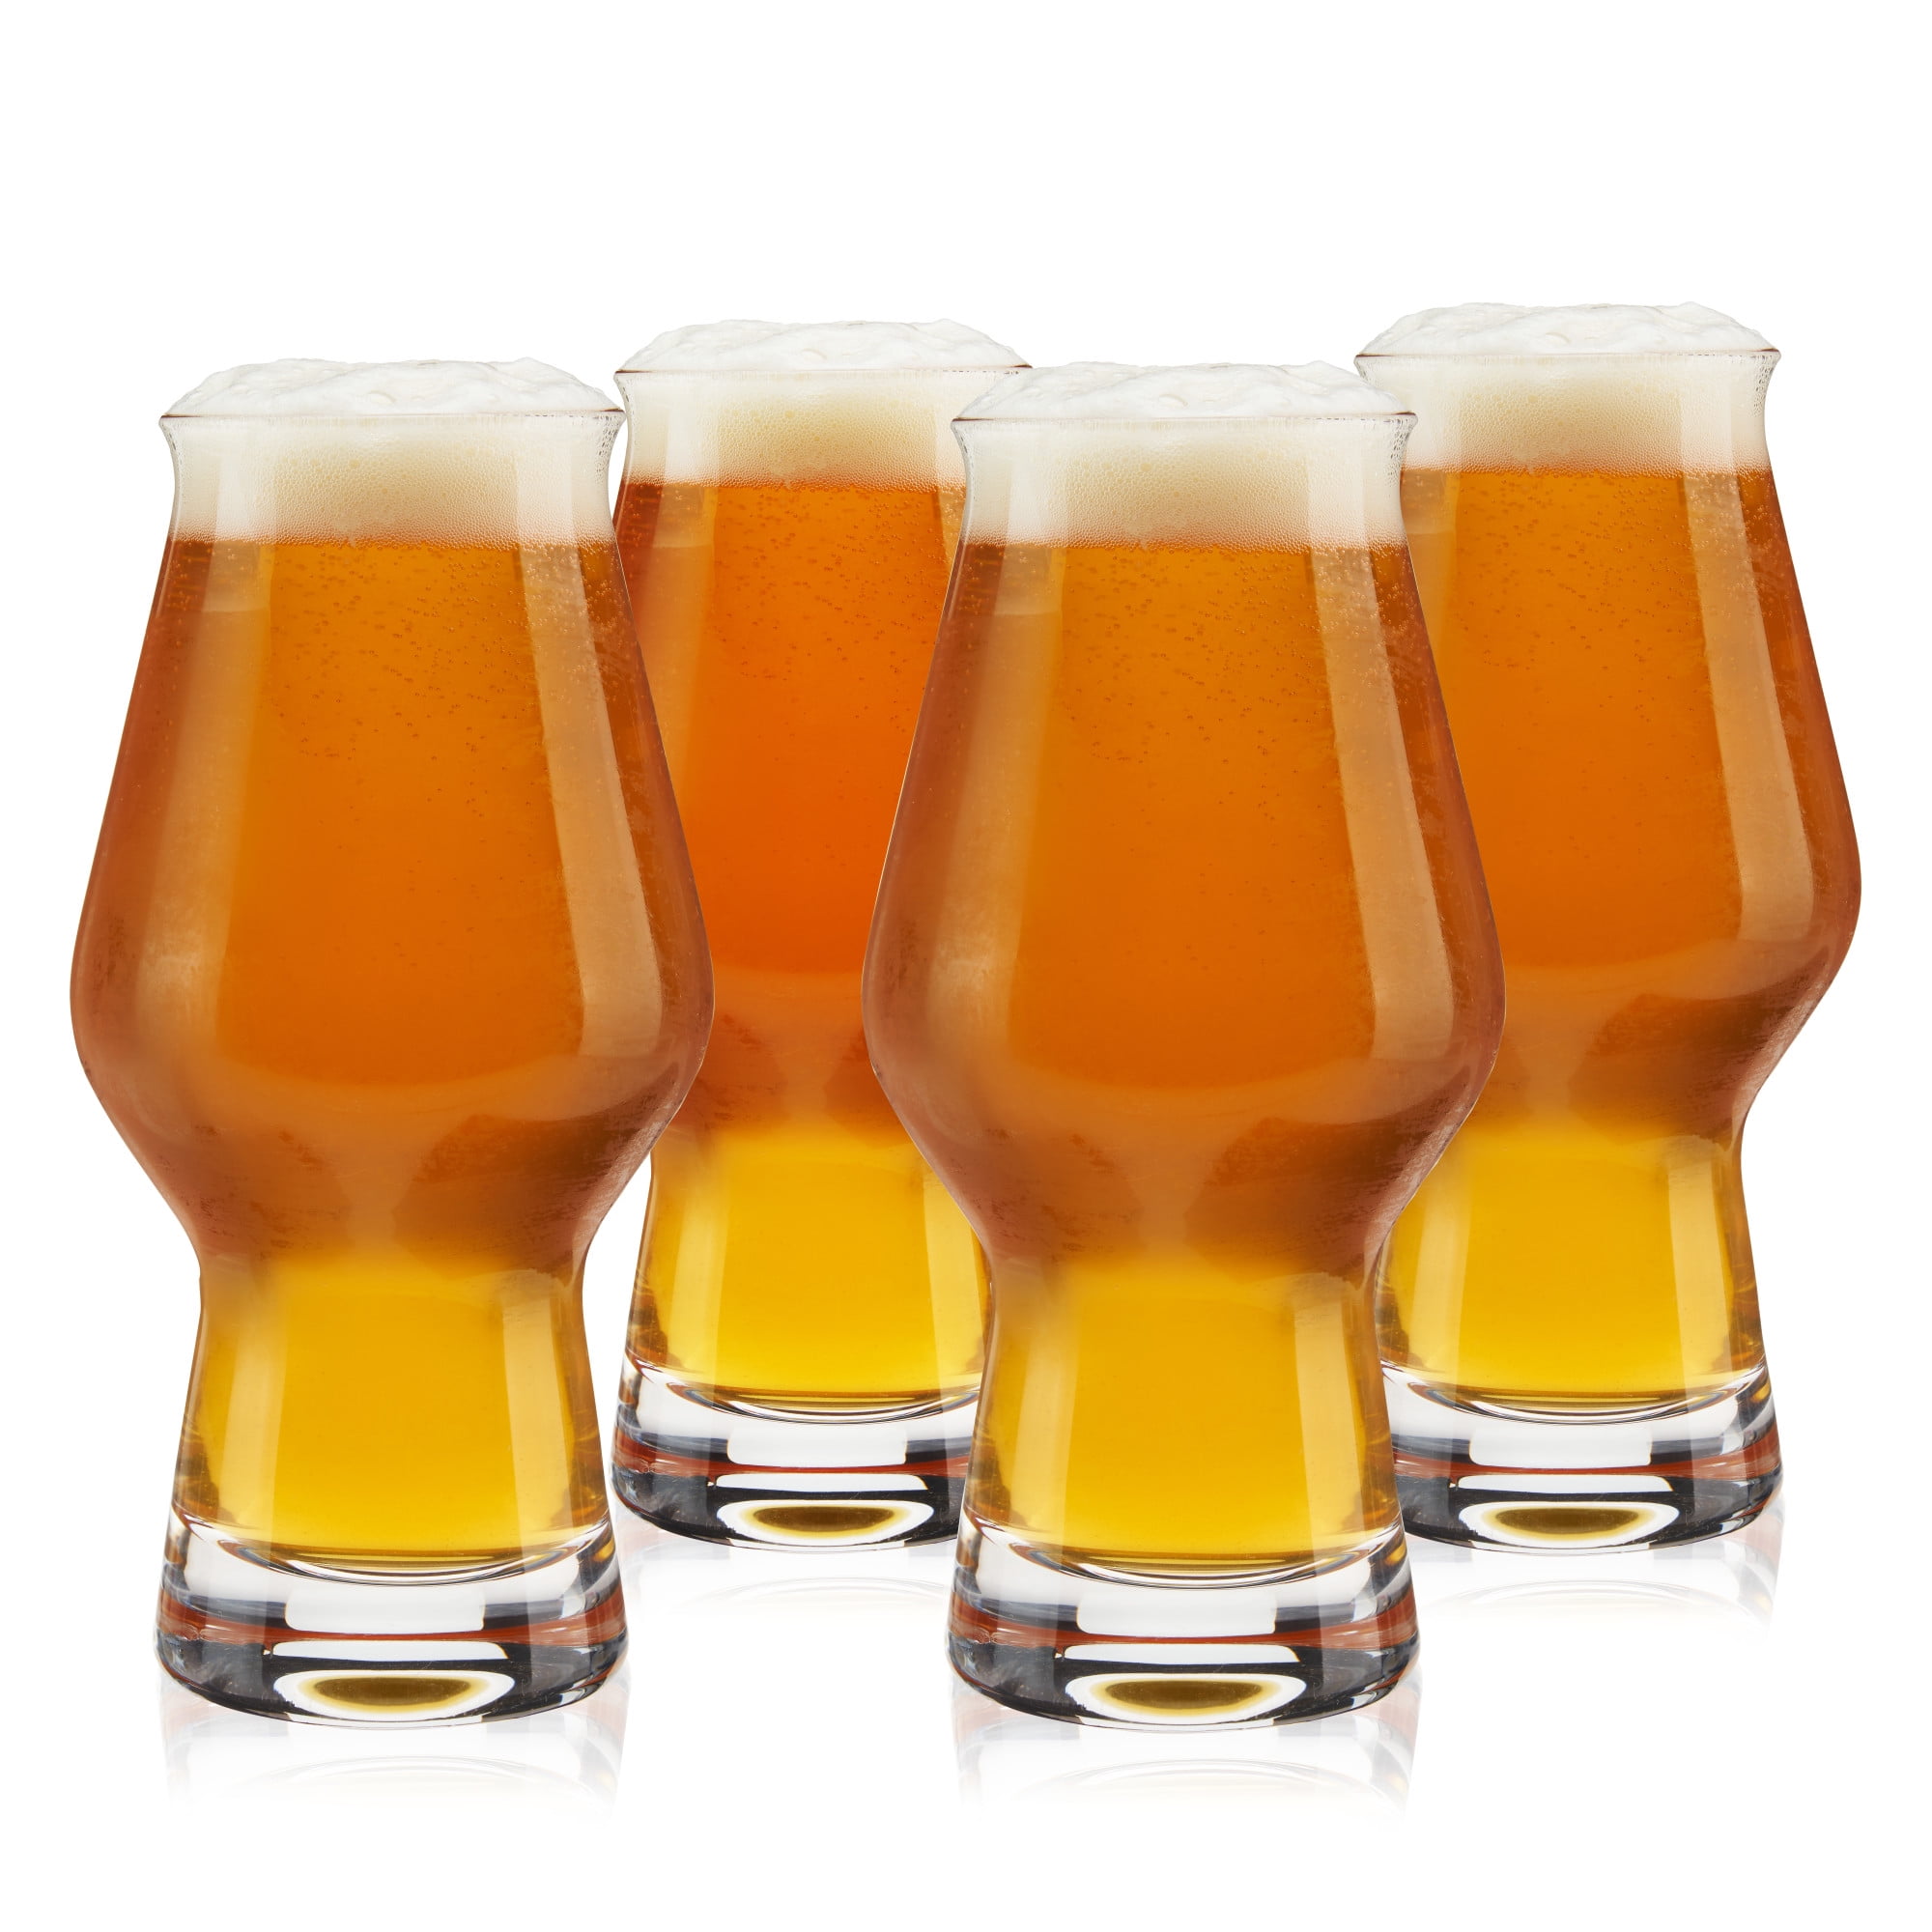 Craft Beer IPA Glass Set of 4, 54 cl